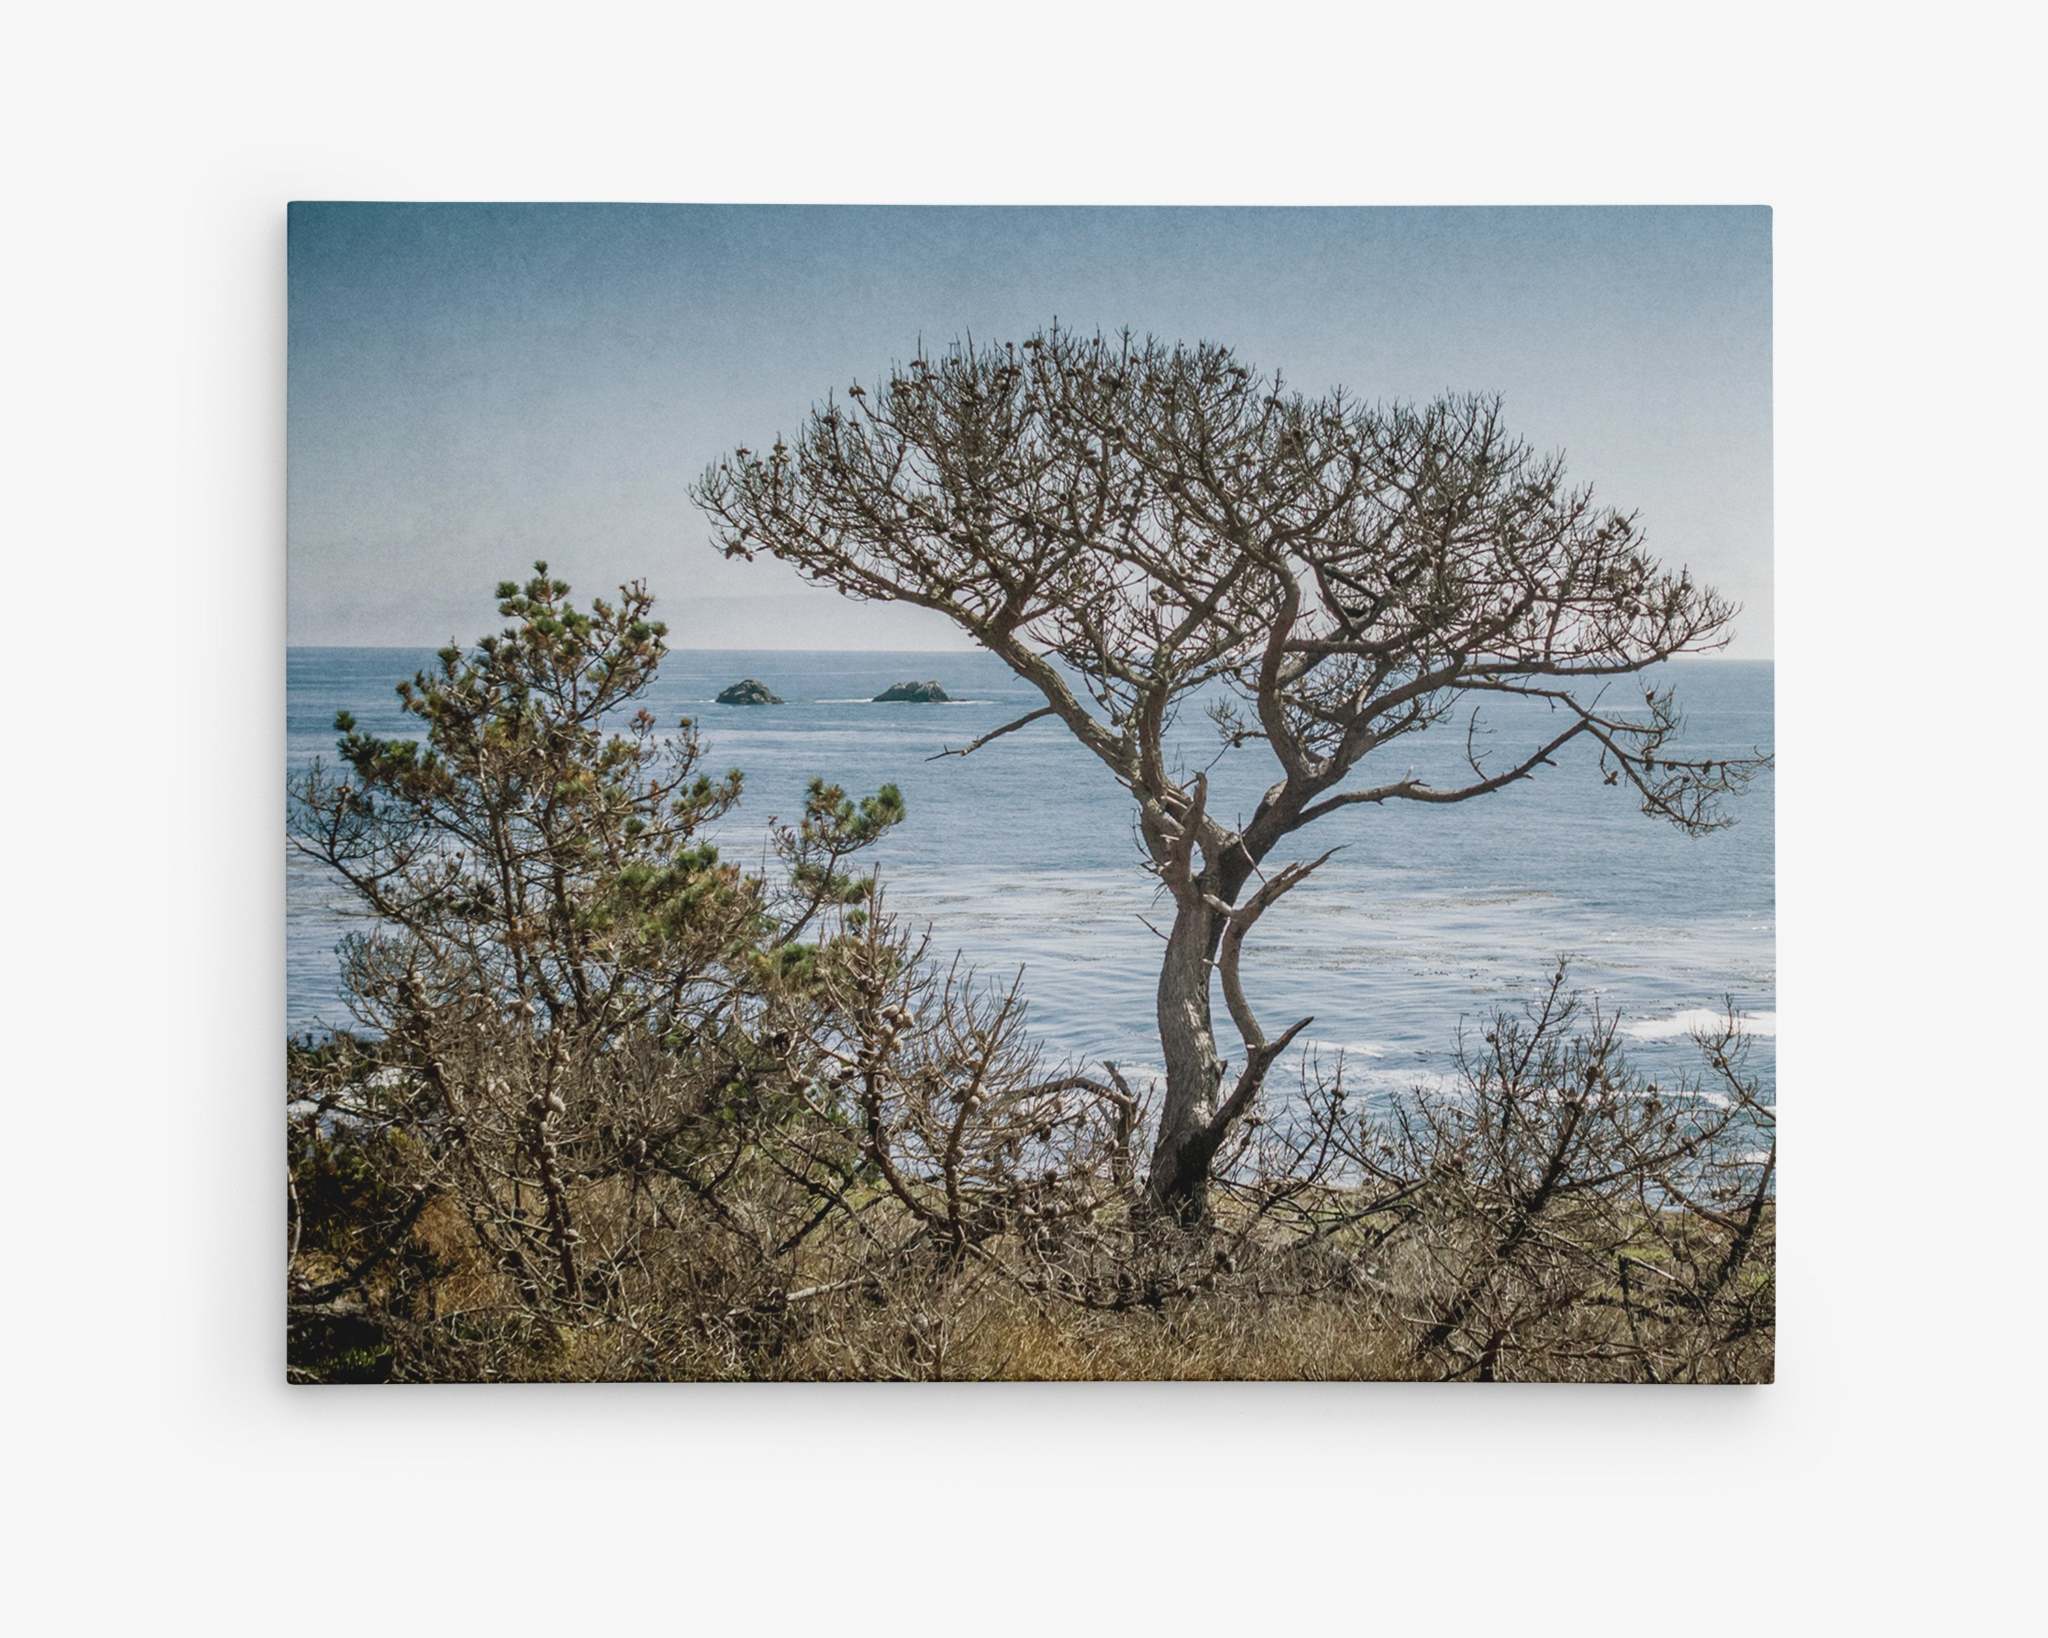 A coastal landscape featuring a tree with bare branches in the foreground and the ocean in the background. Small rocky islets are visible in the sea under a clear blue sky along the stunning Big Sur coastline. Vegetation around the tree adds depth to this serene scene, perfect for Offley Green's premium artist-grade California Landscape Canvas Art in Big Sur, 'Wind Blown Tree'.